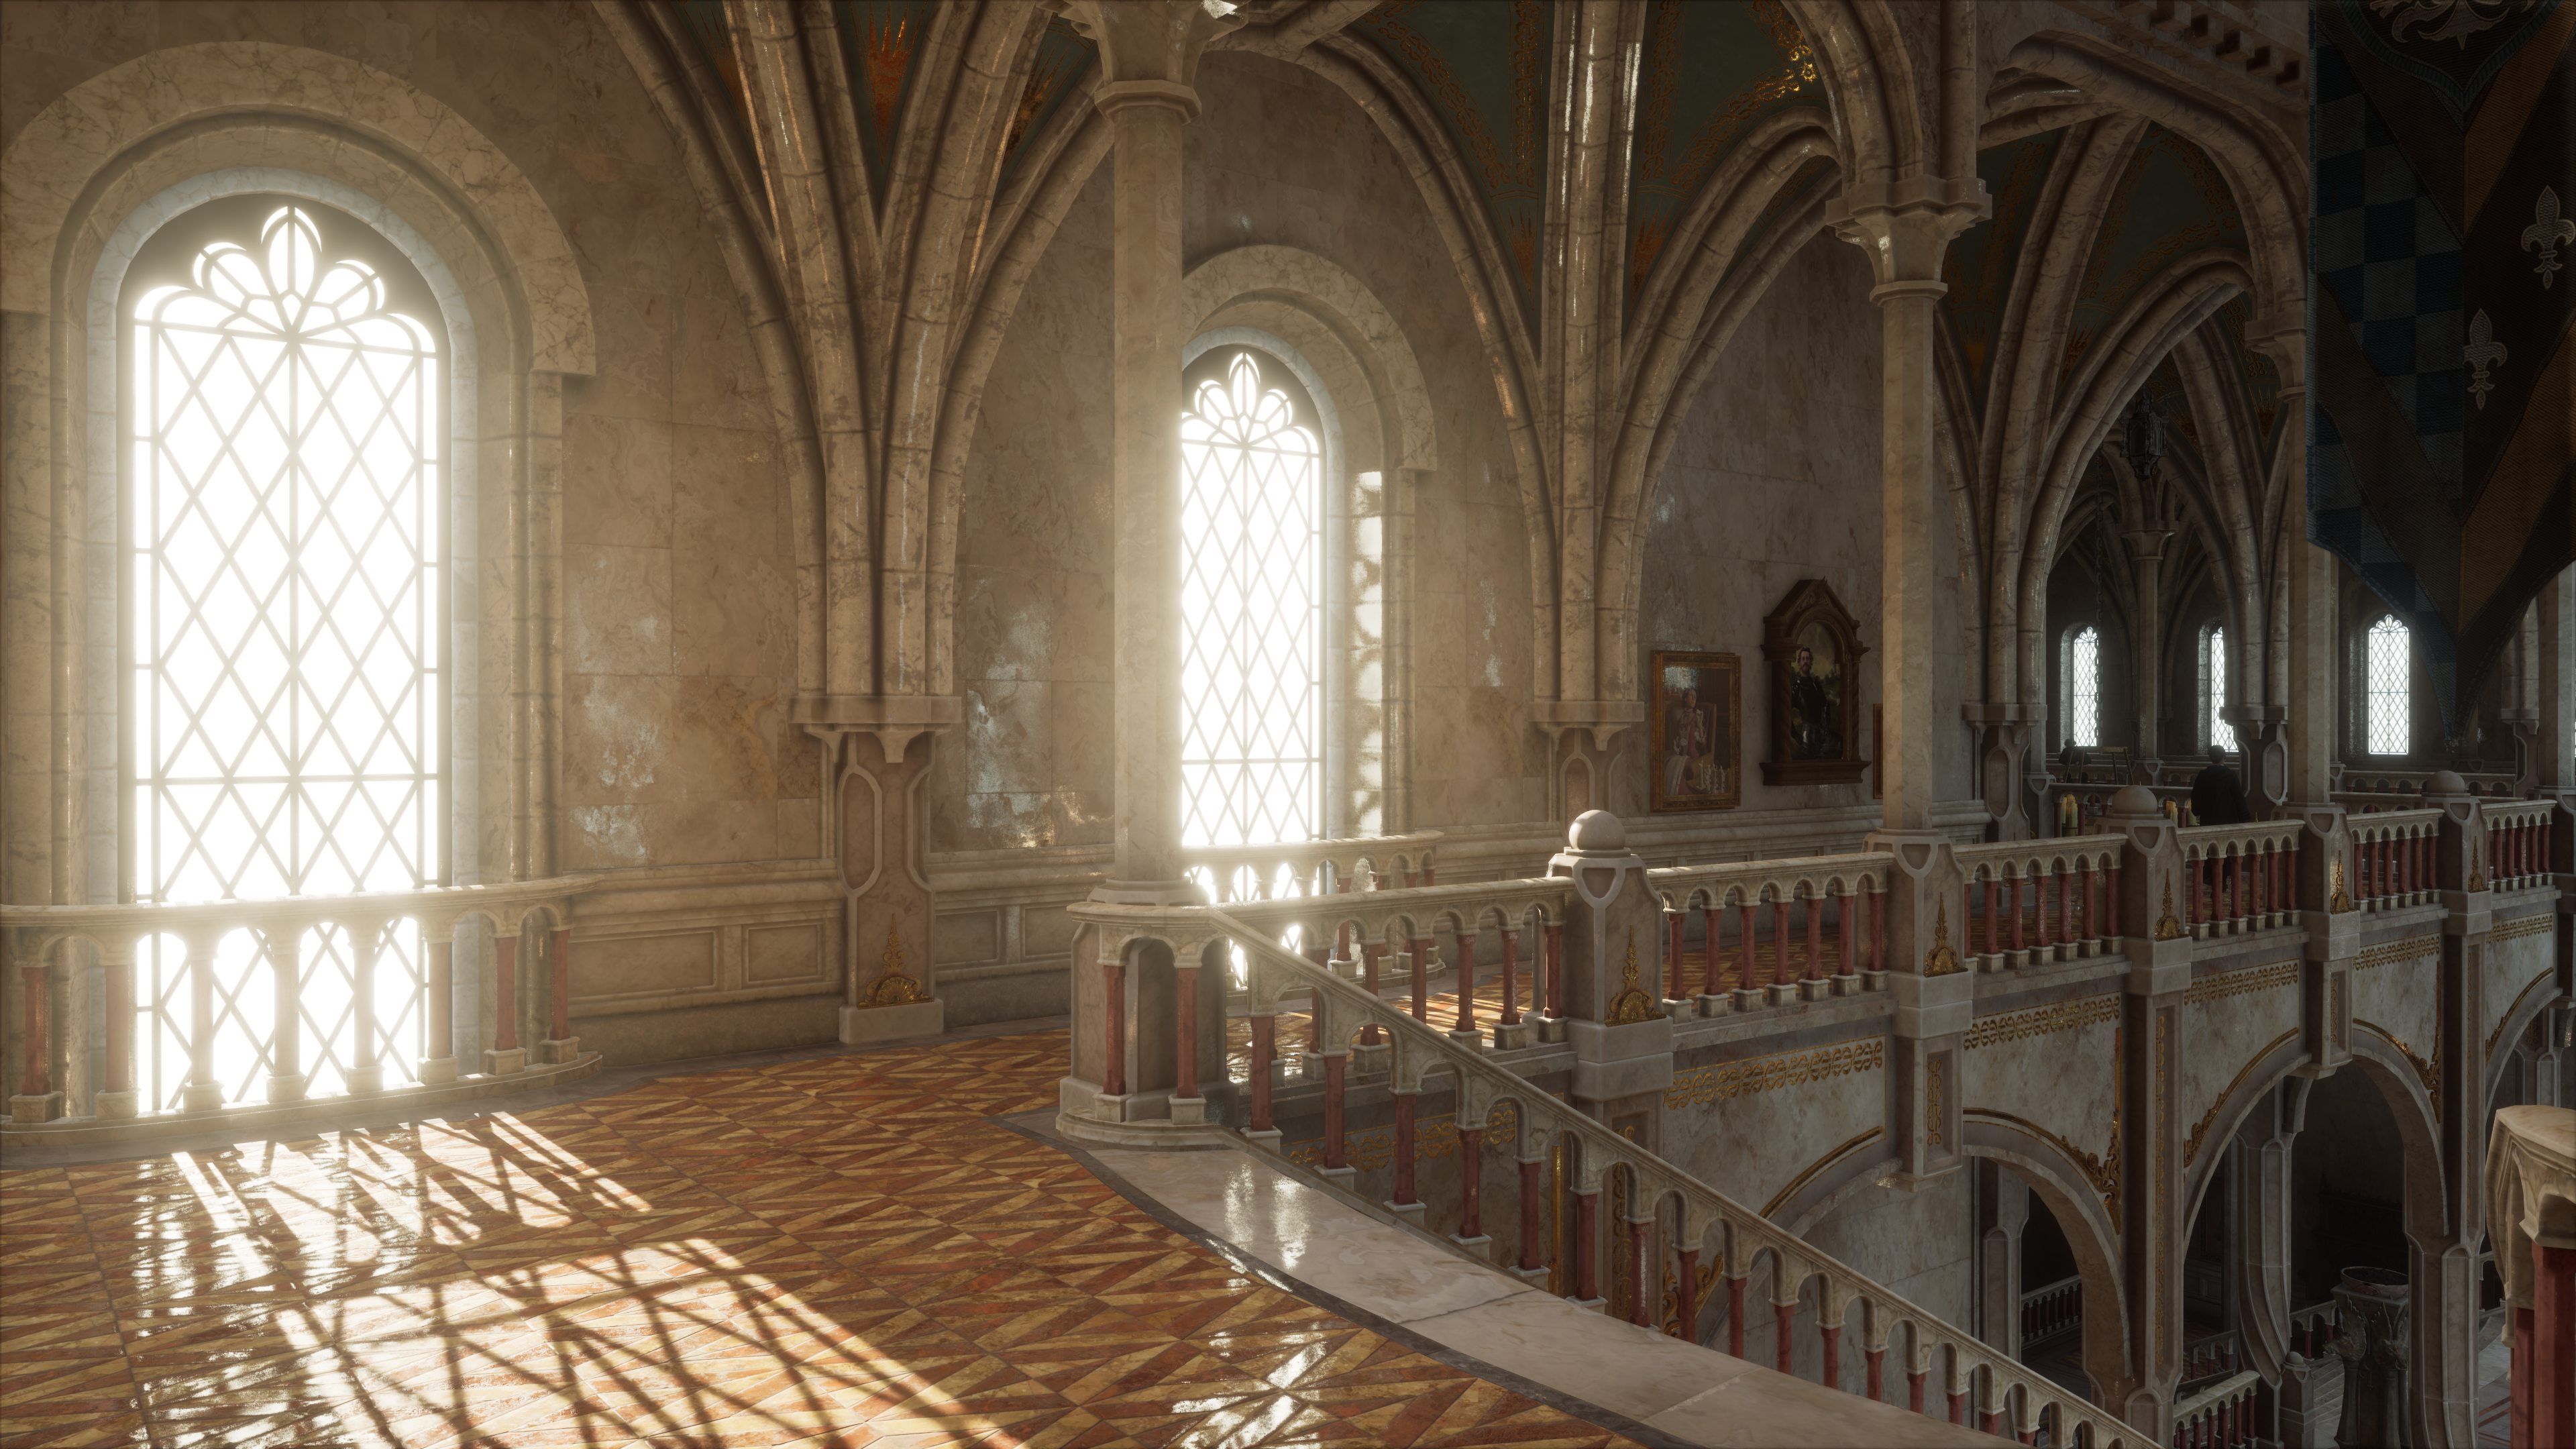 General 3840x2160 Nvidia RTX Hogwarts Legacy video games CGI video game art interior window sunlight architecture Avalanche Software